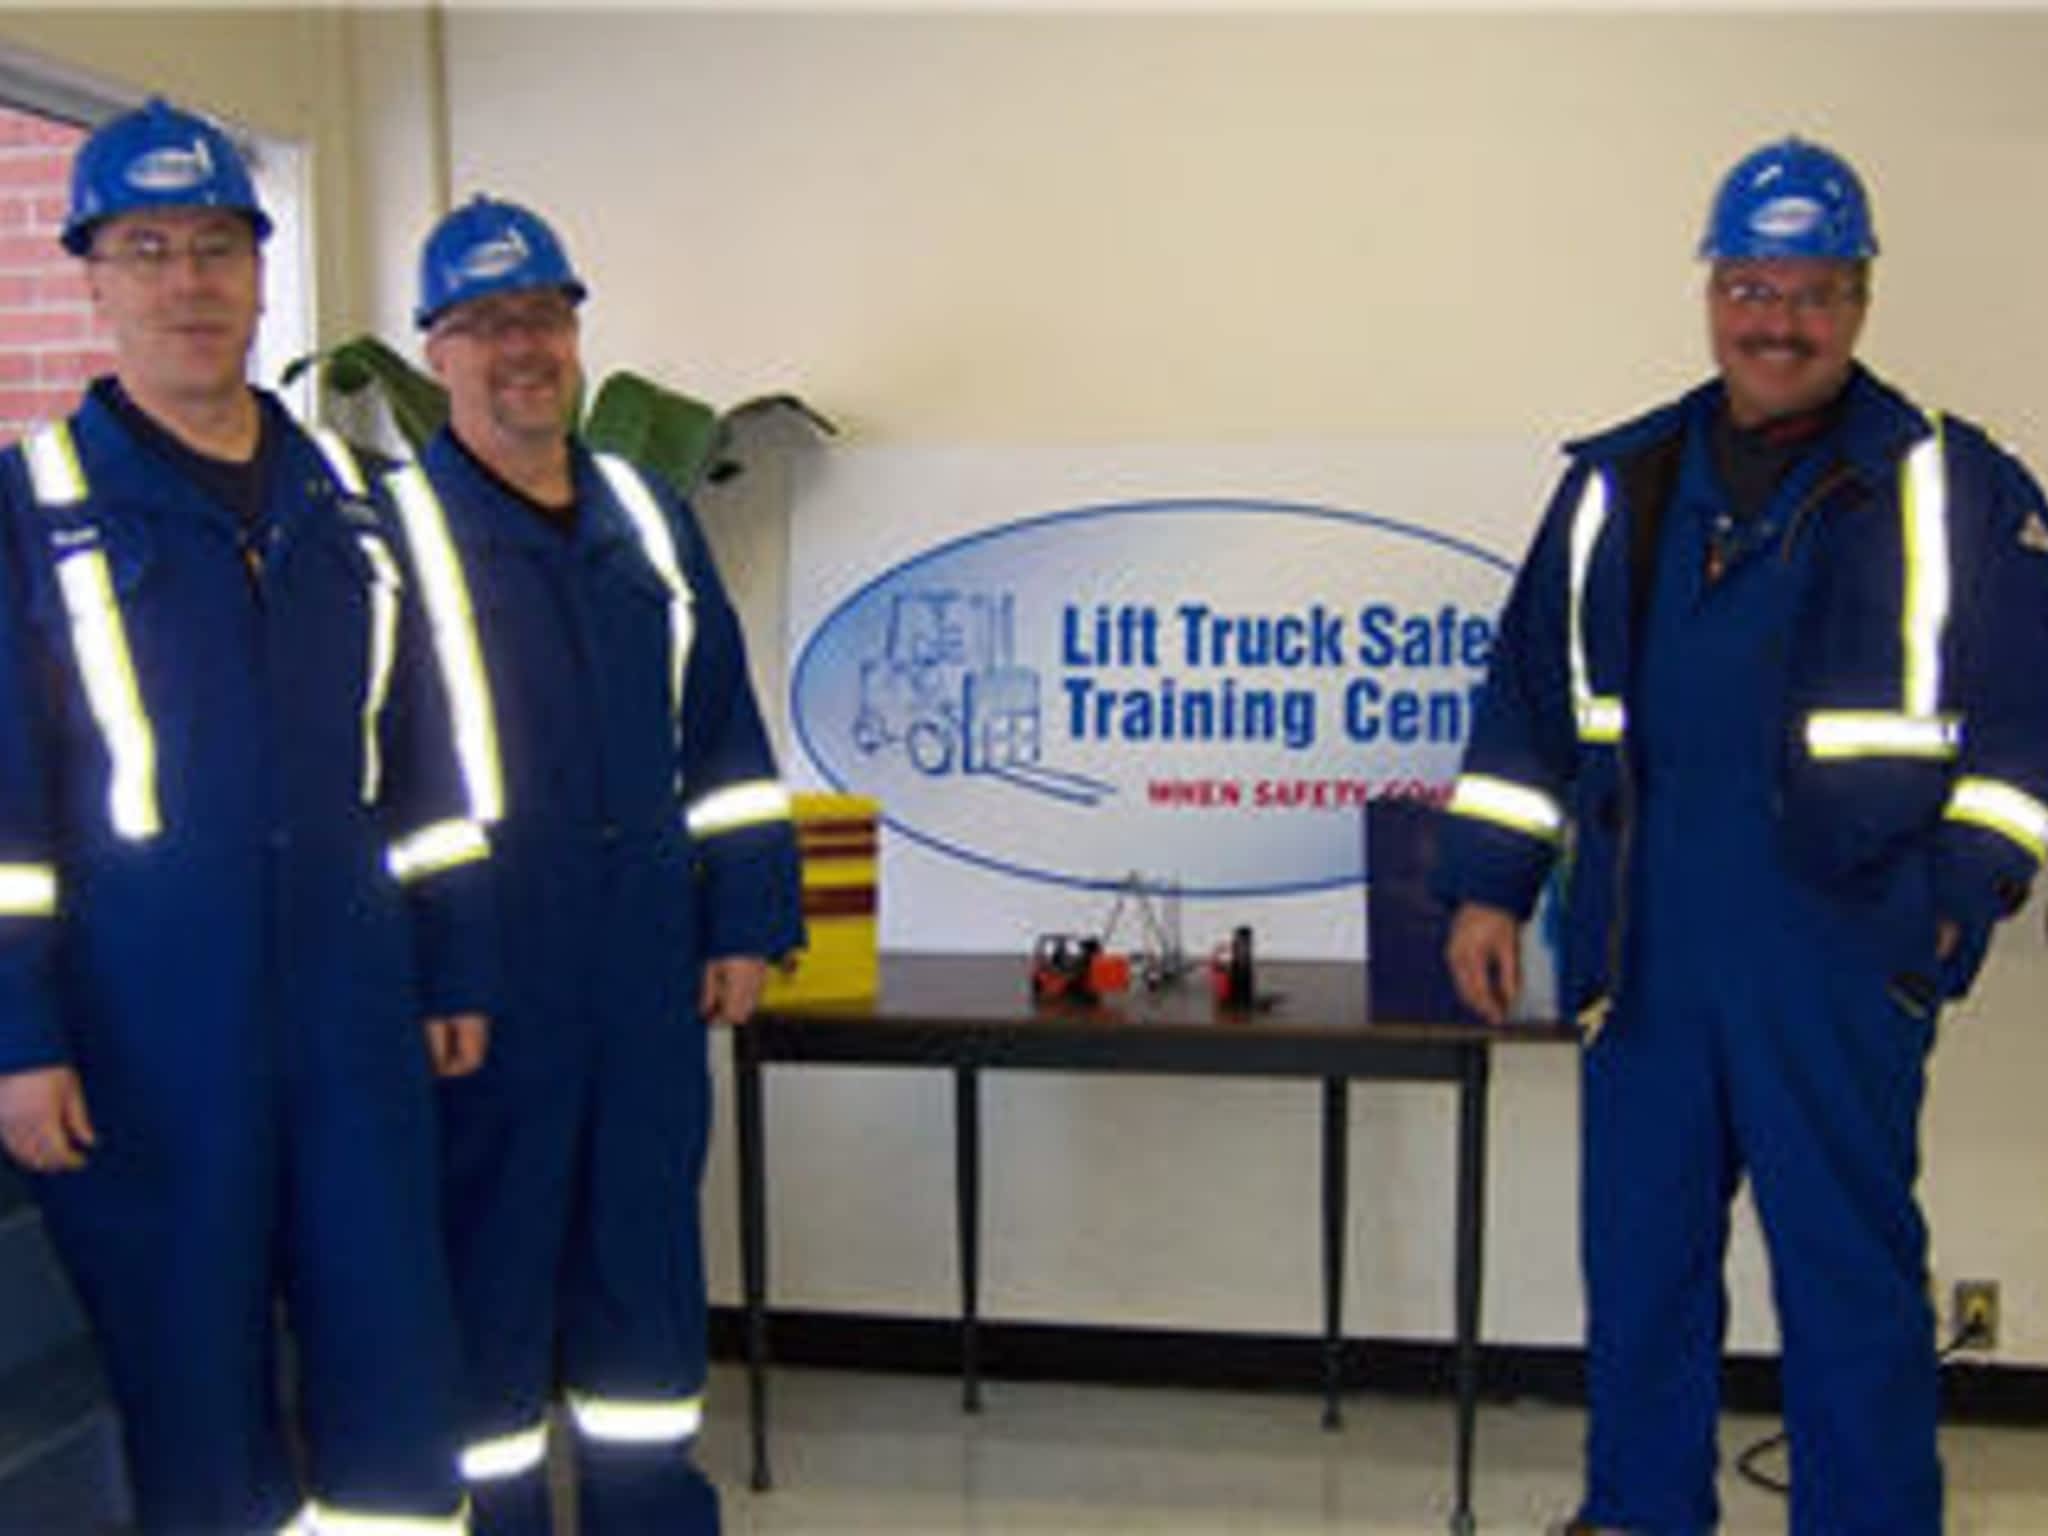 photo Lift Truck Safety Training Centre Inc